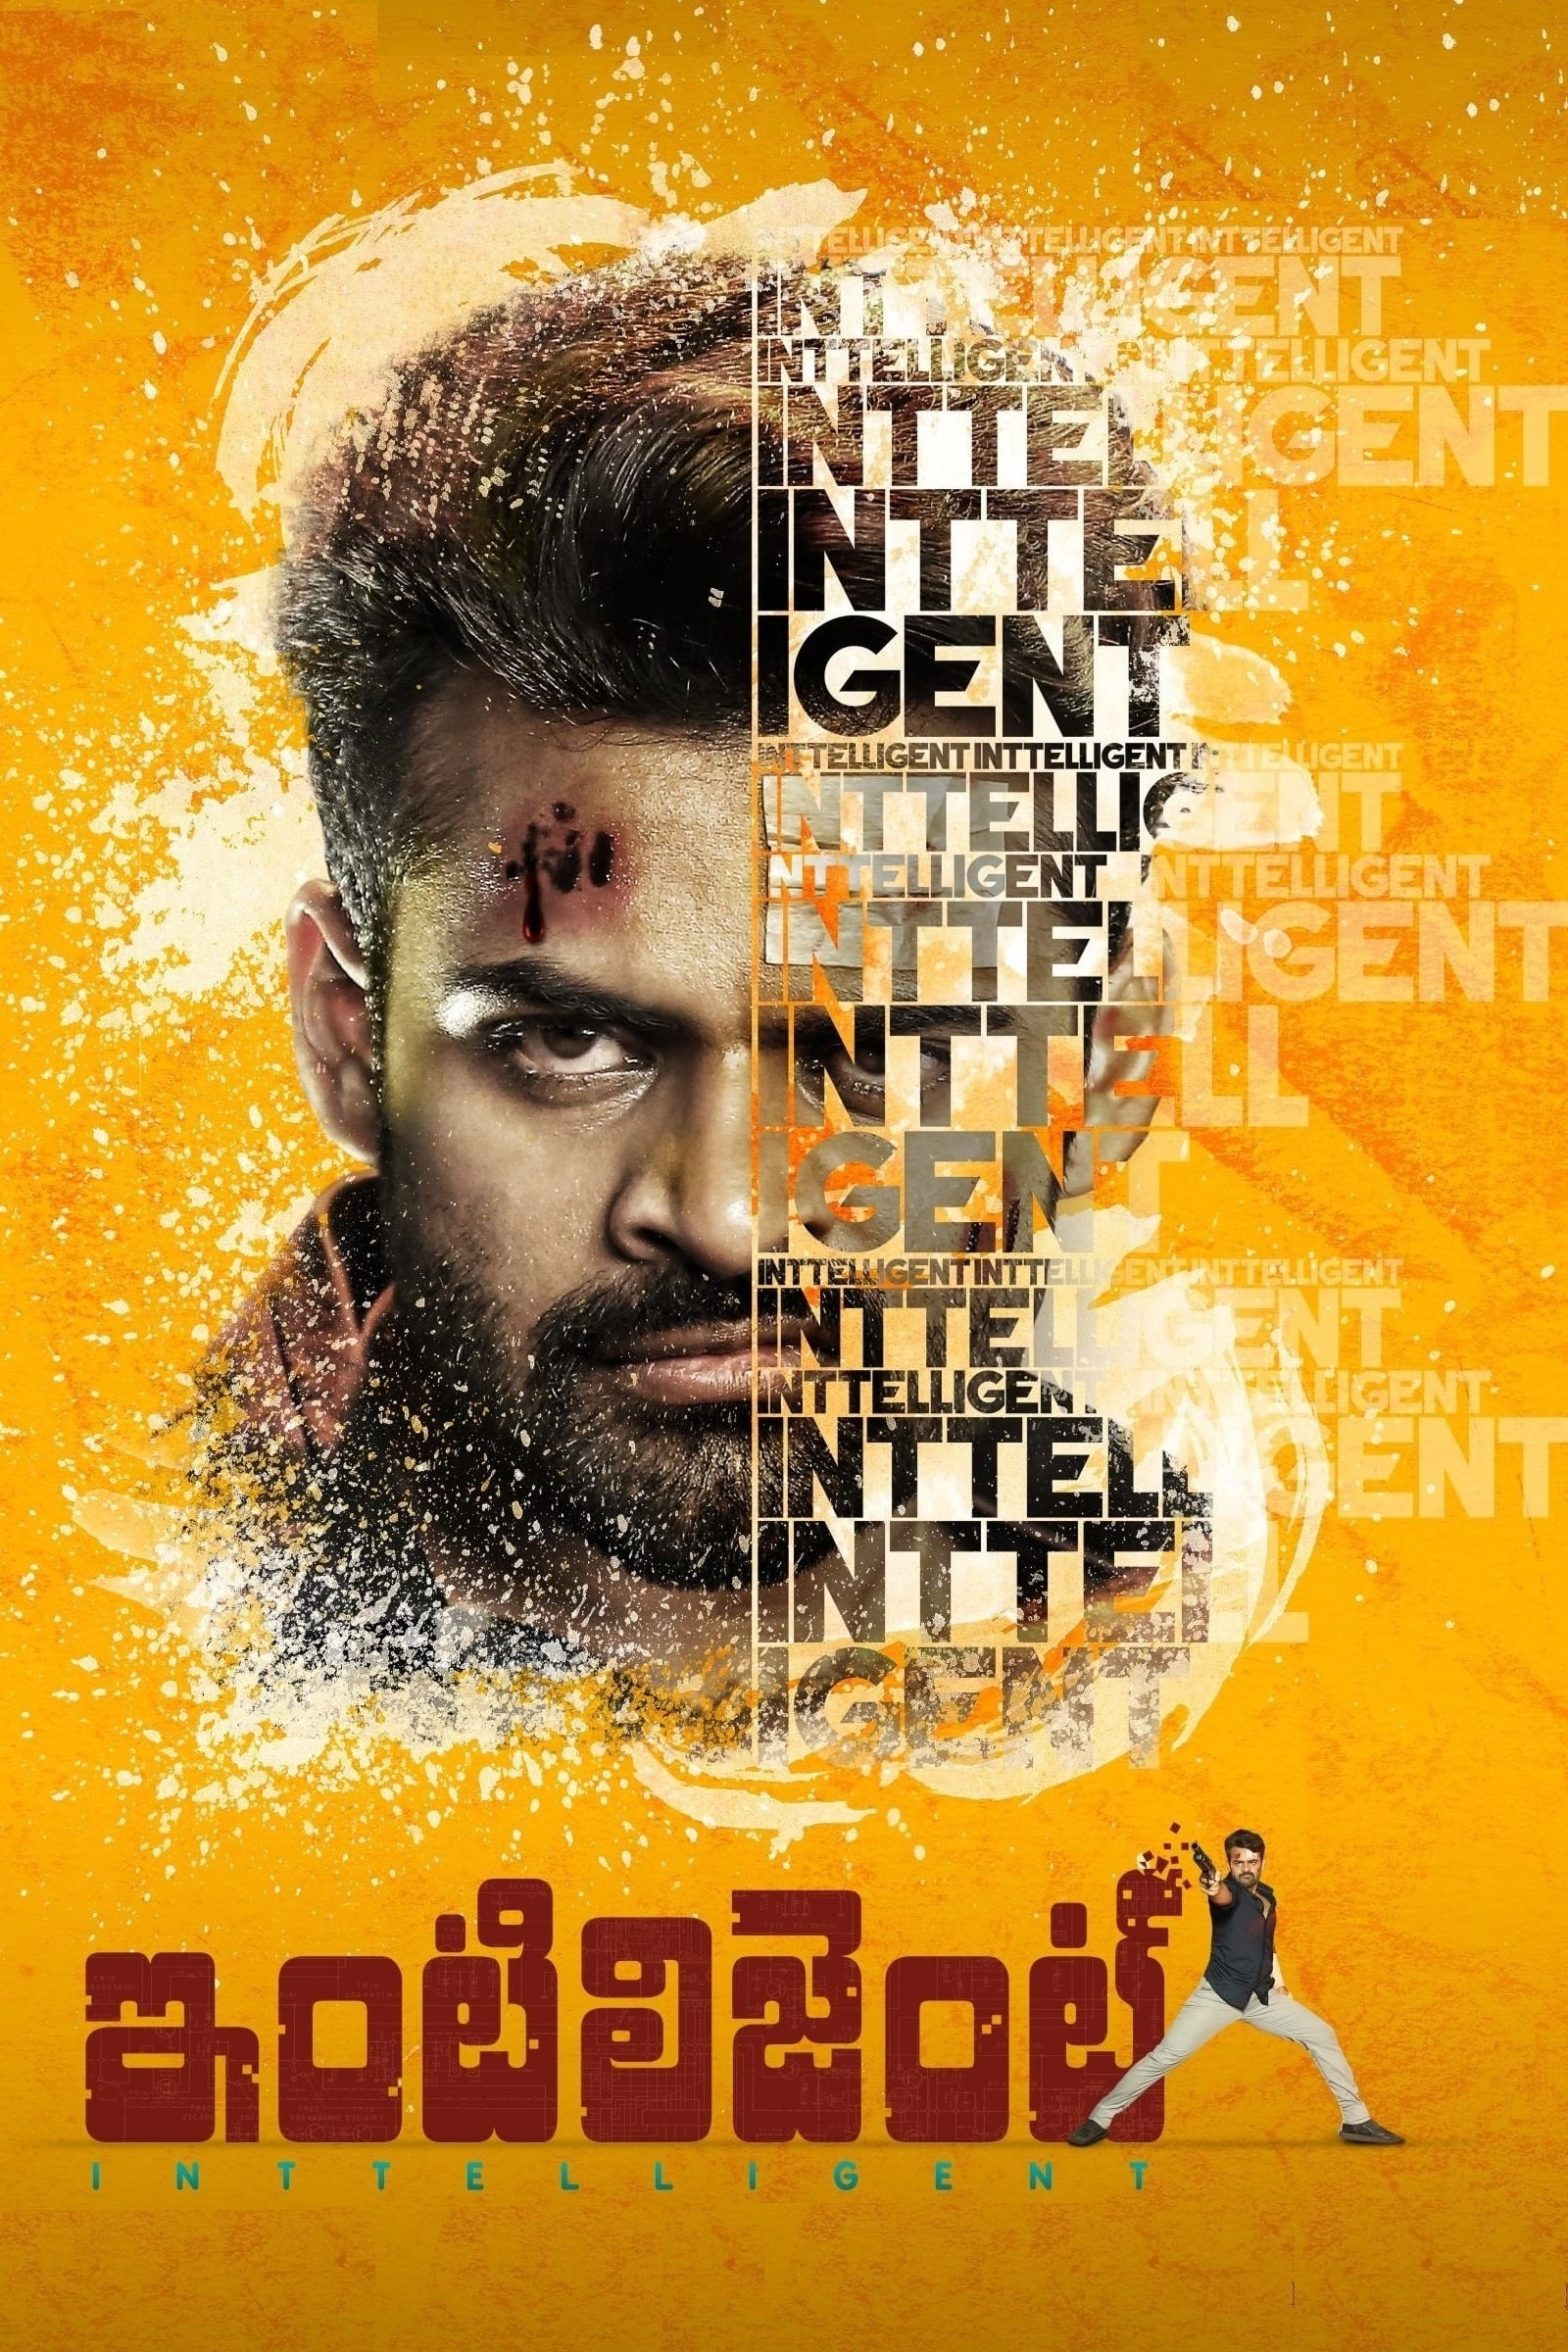 Poster for the movie "Inttelligent"